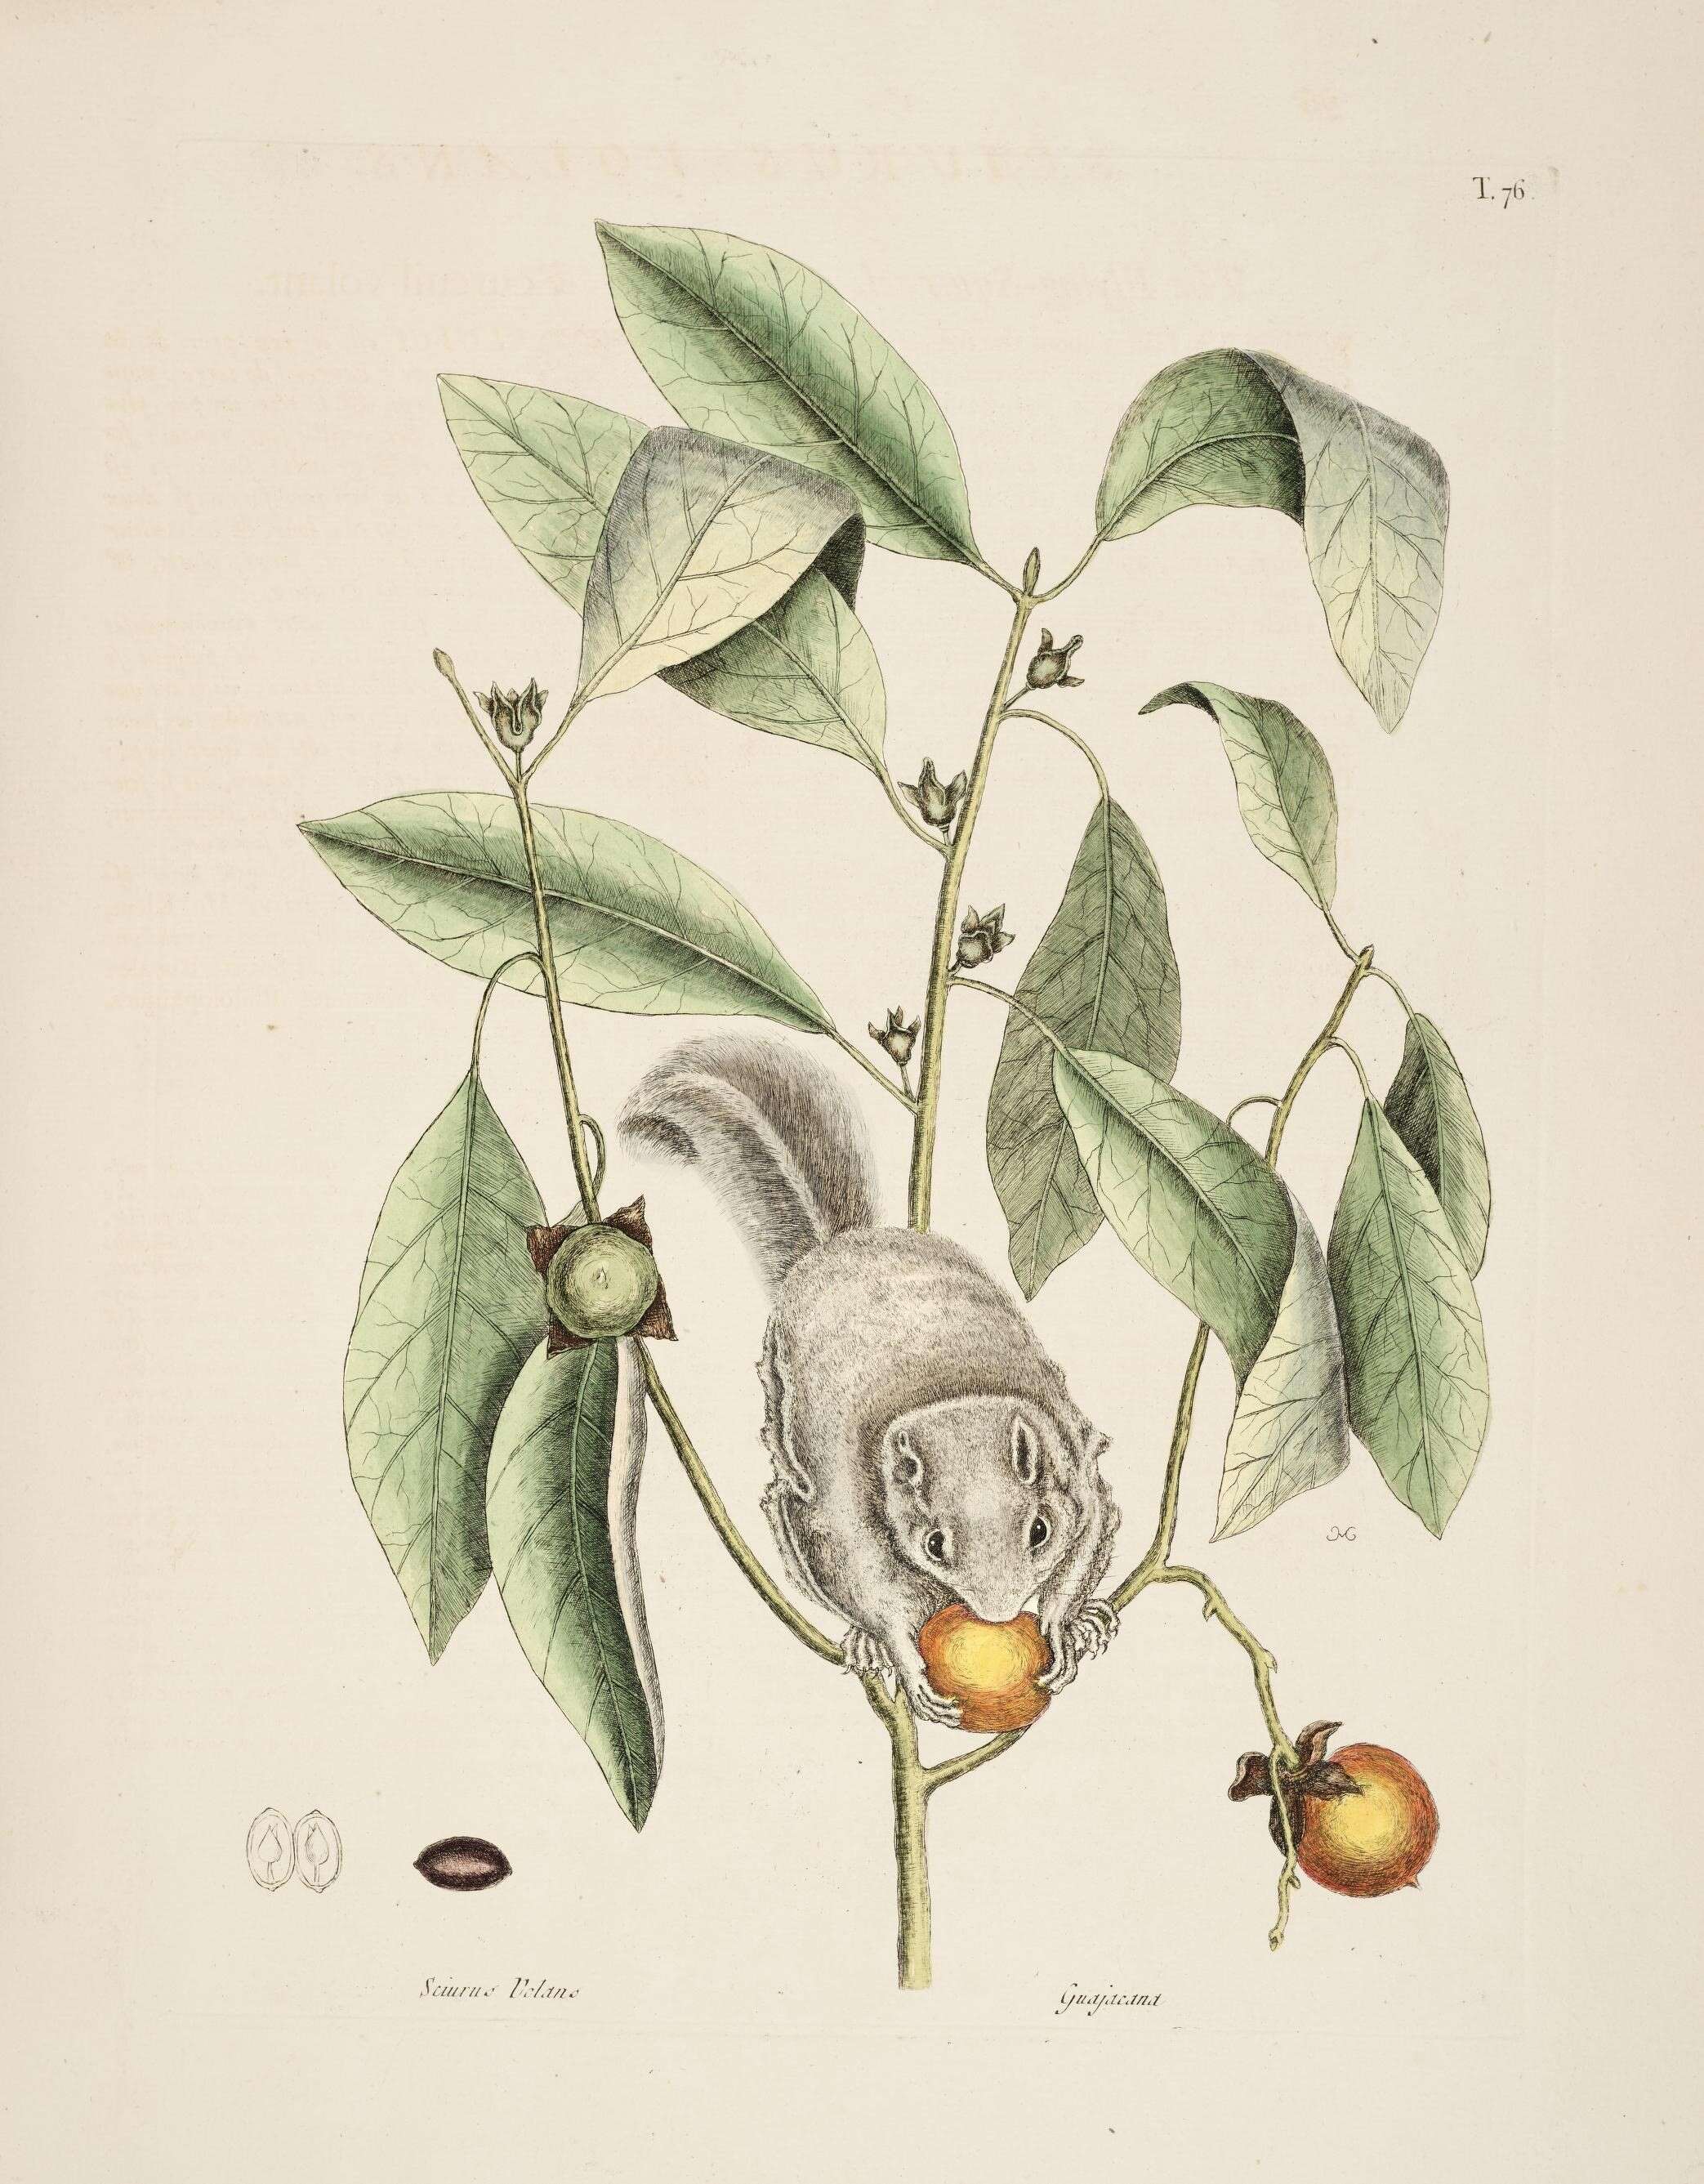 Image of common persimmon